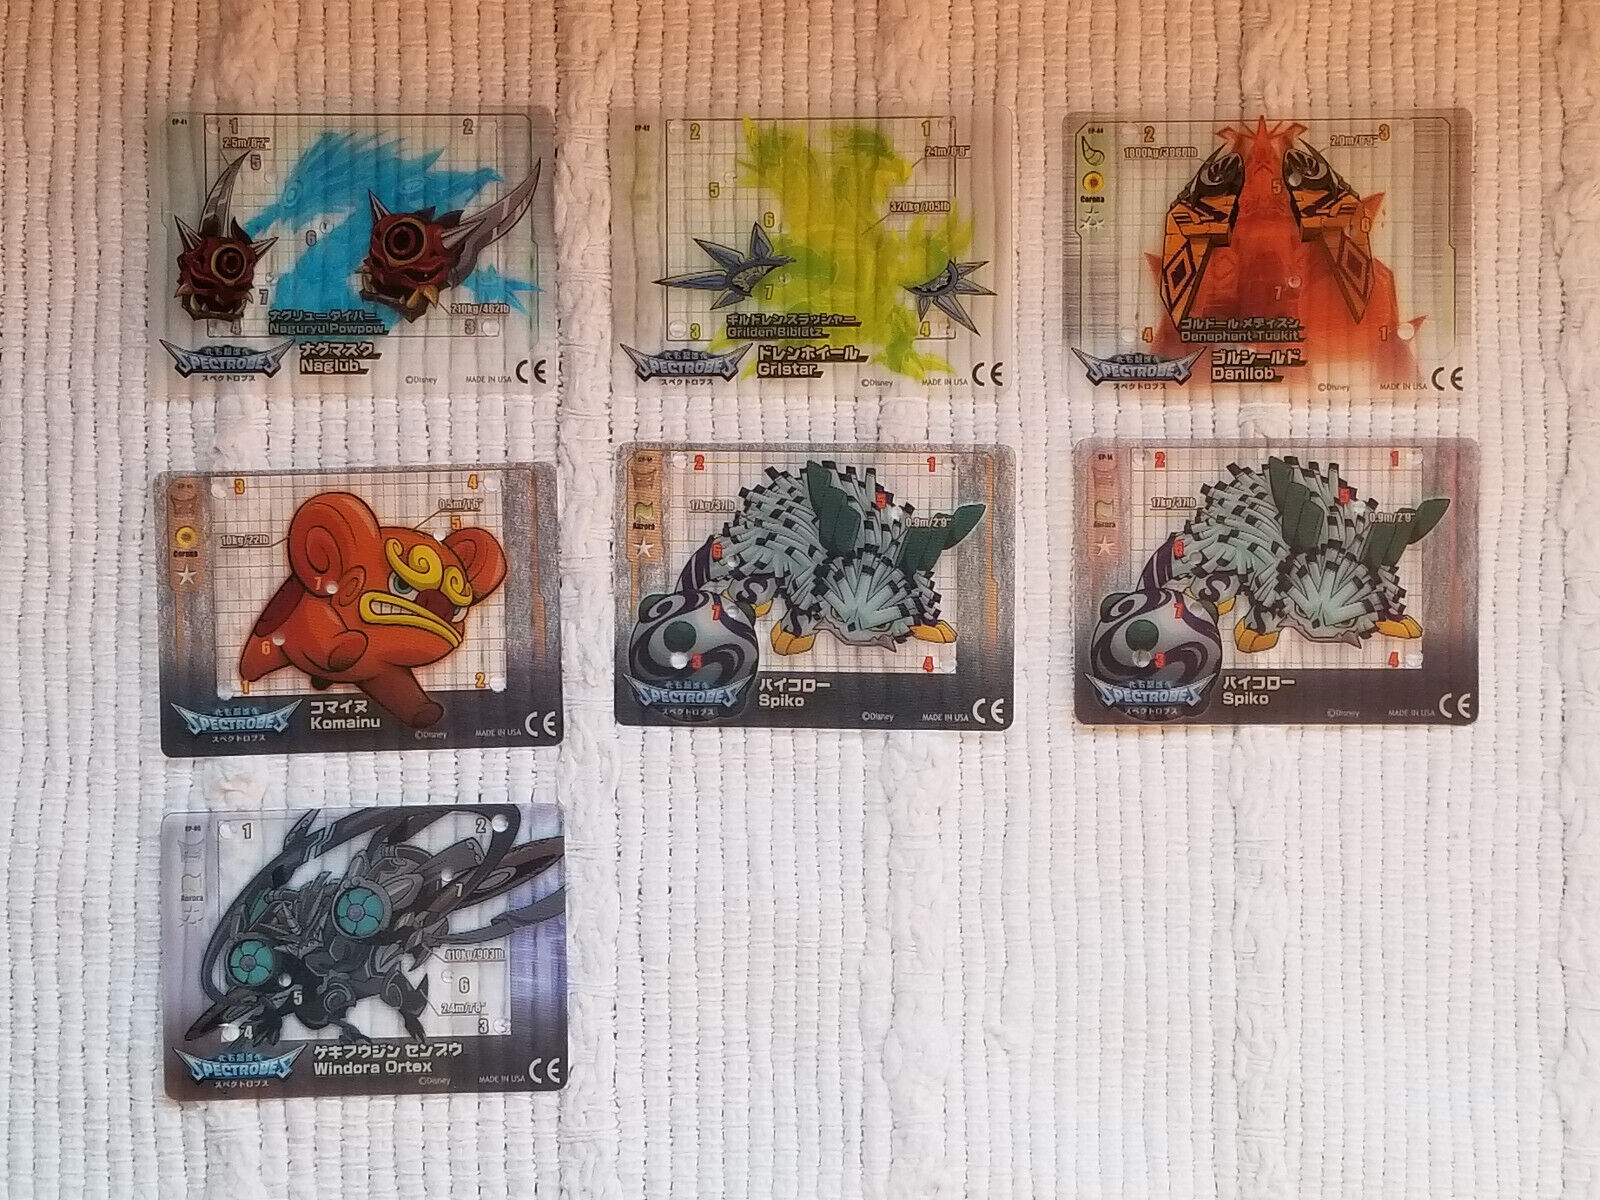 2007 Disney Spectrobes Nintendo DS INPUT CARDS - Lot of 7 - Great Condition